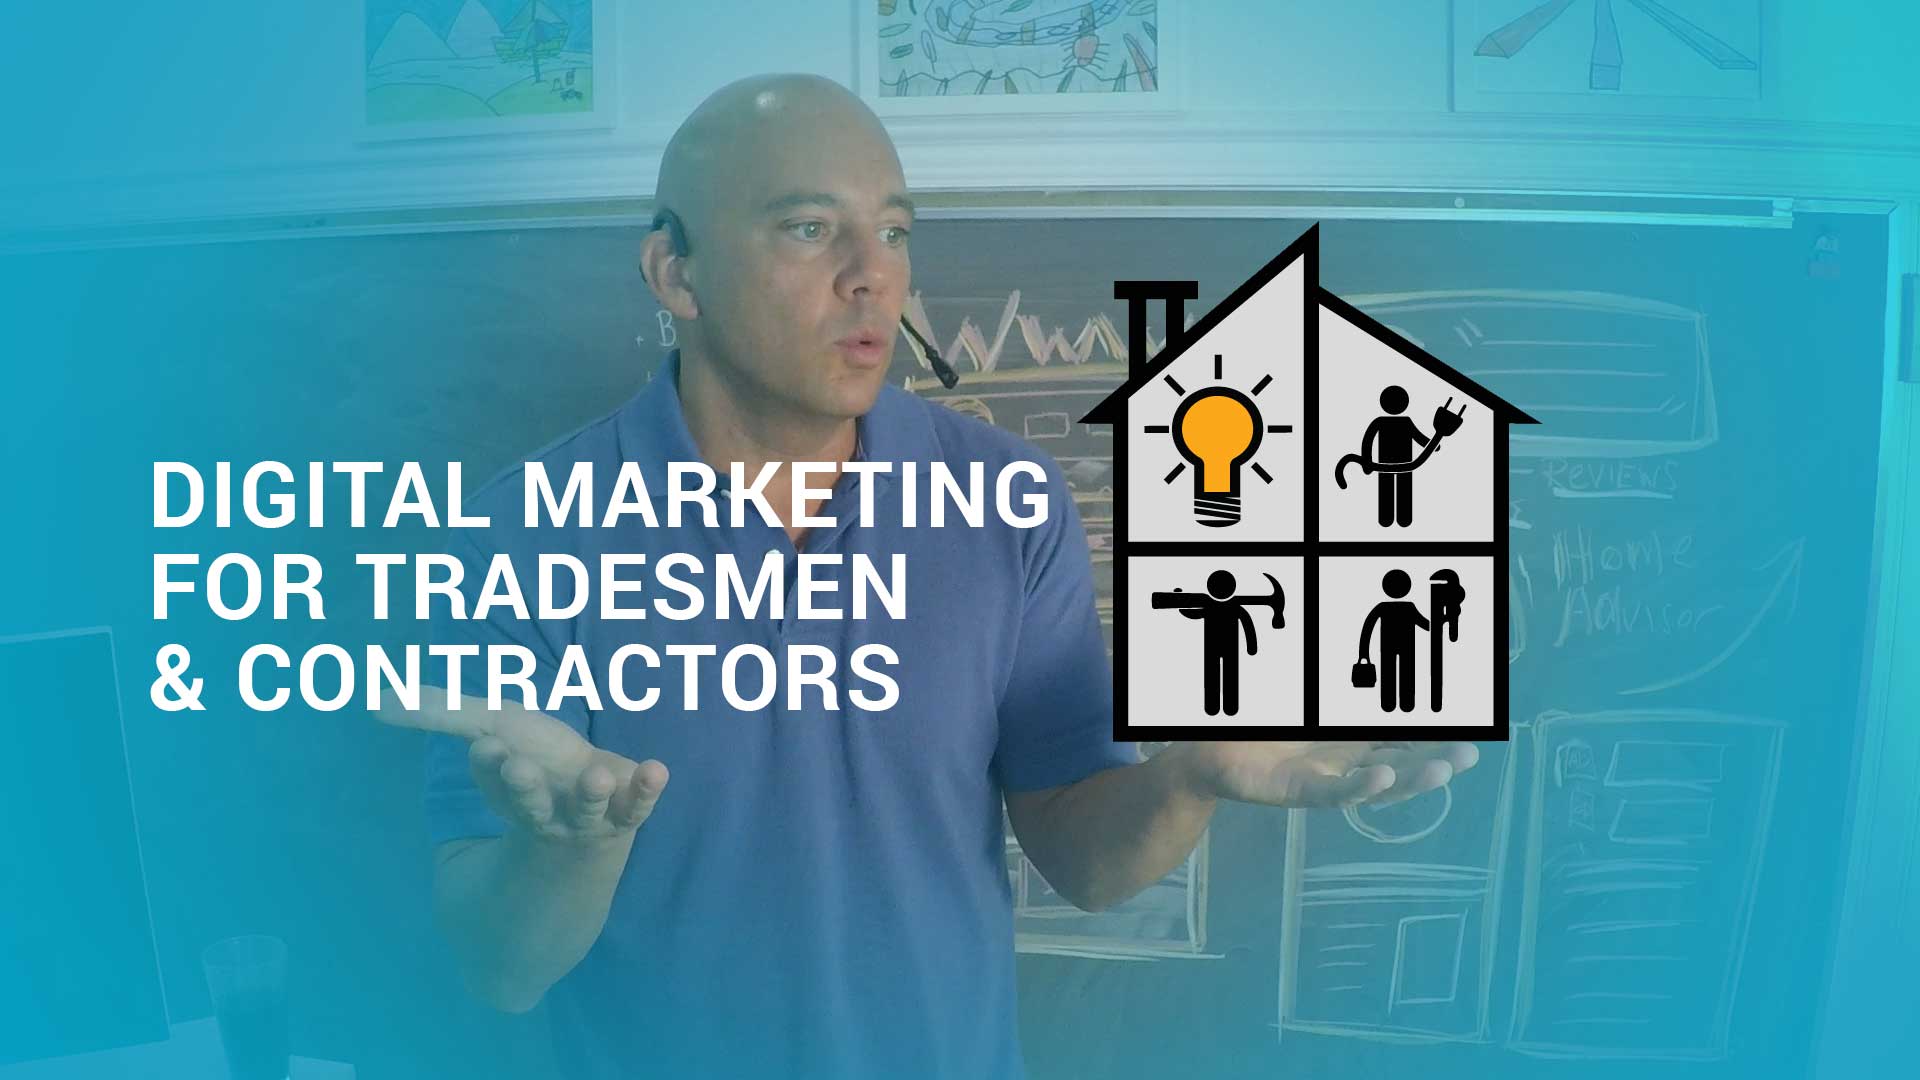 Featured image for “How-to: Digital marketing for tradesmen & contractors”